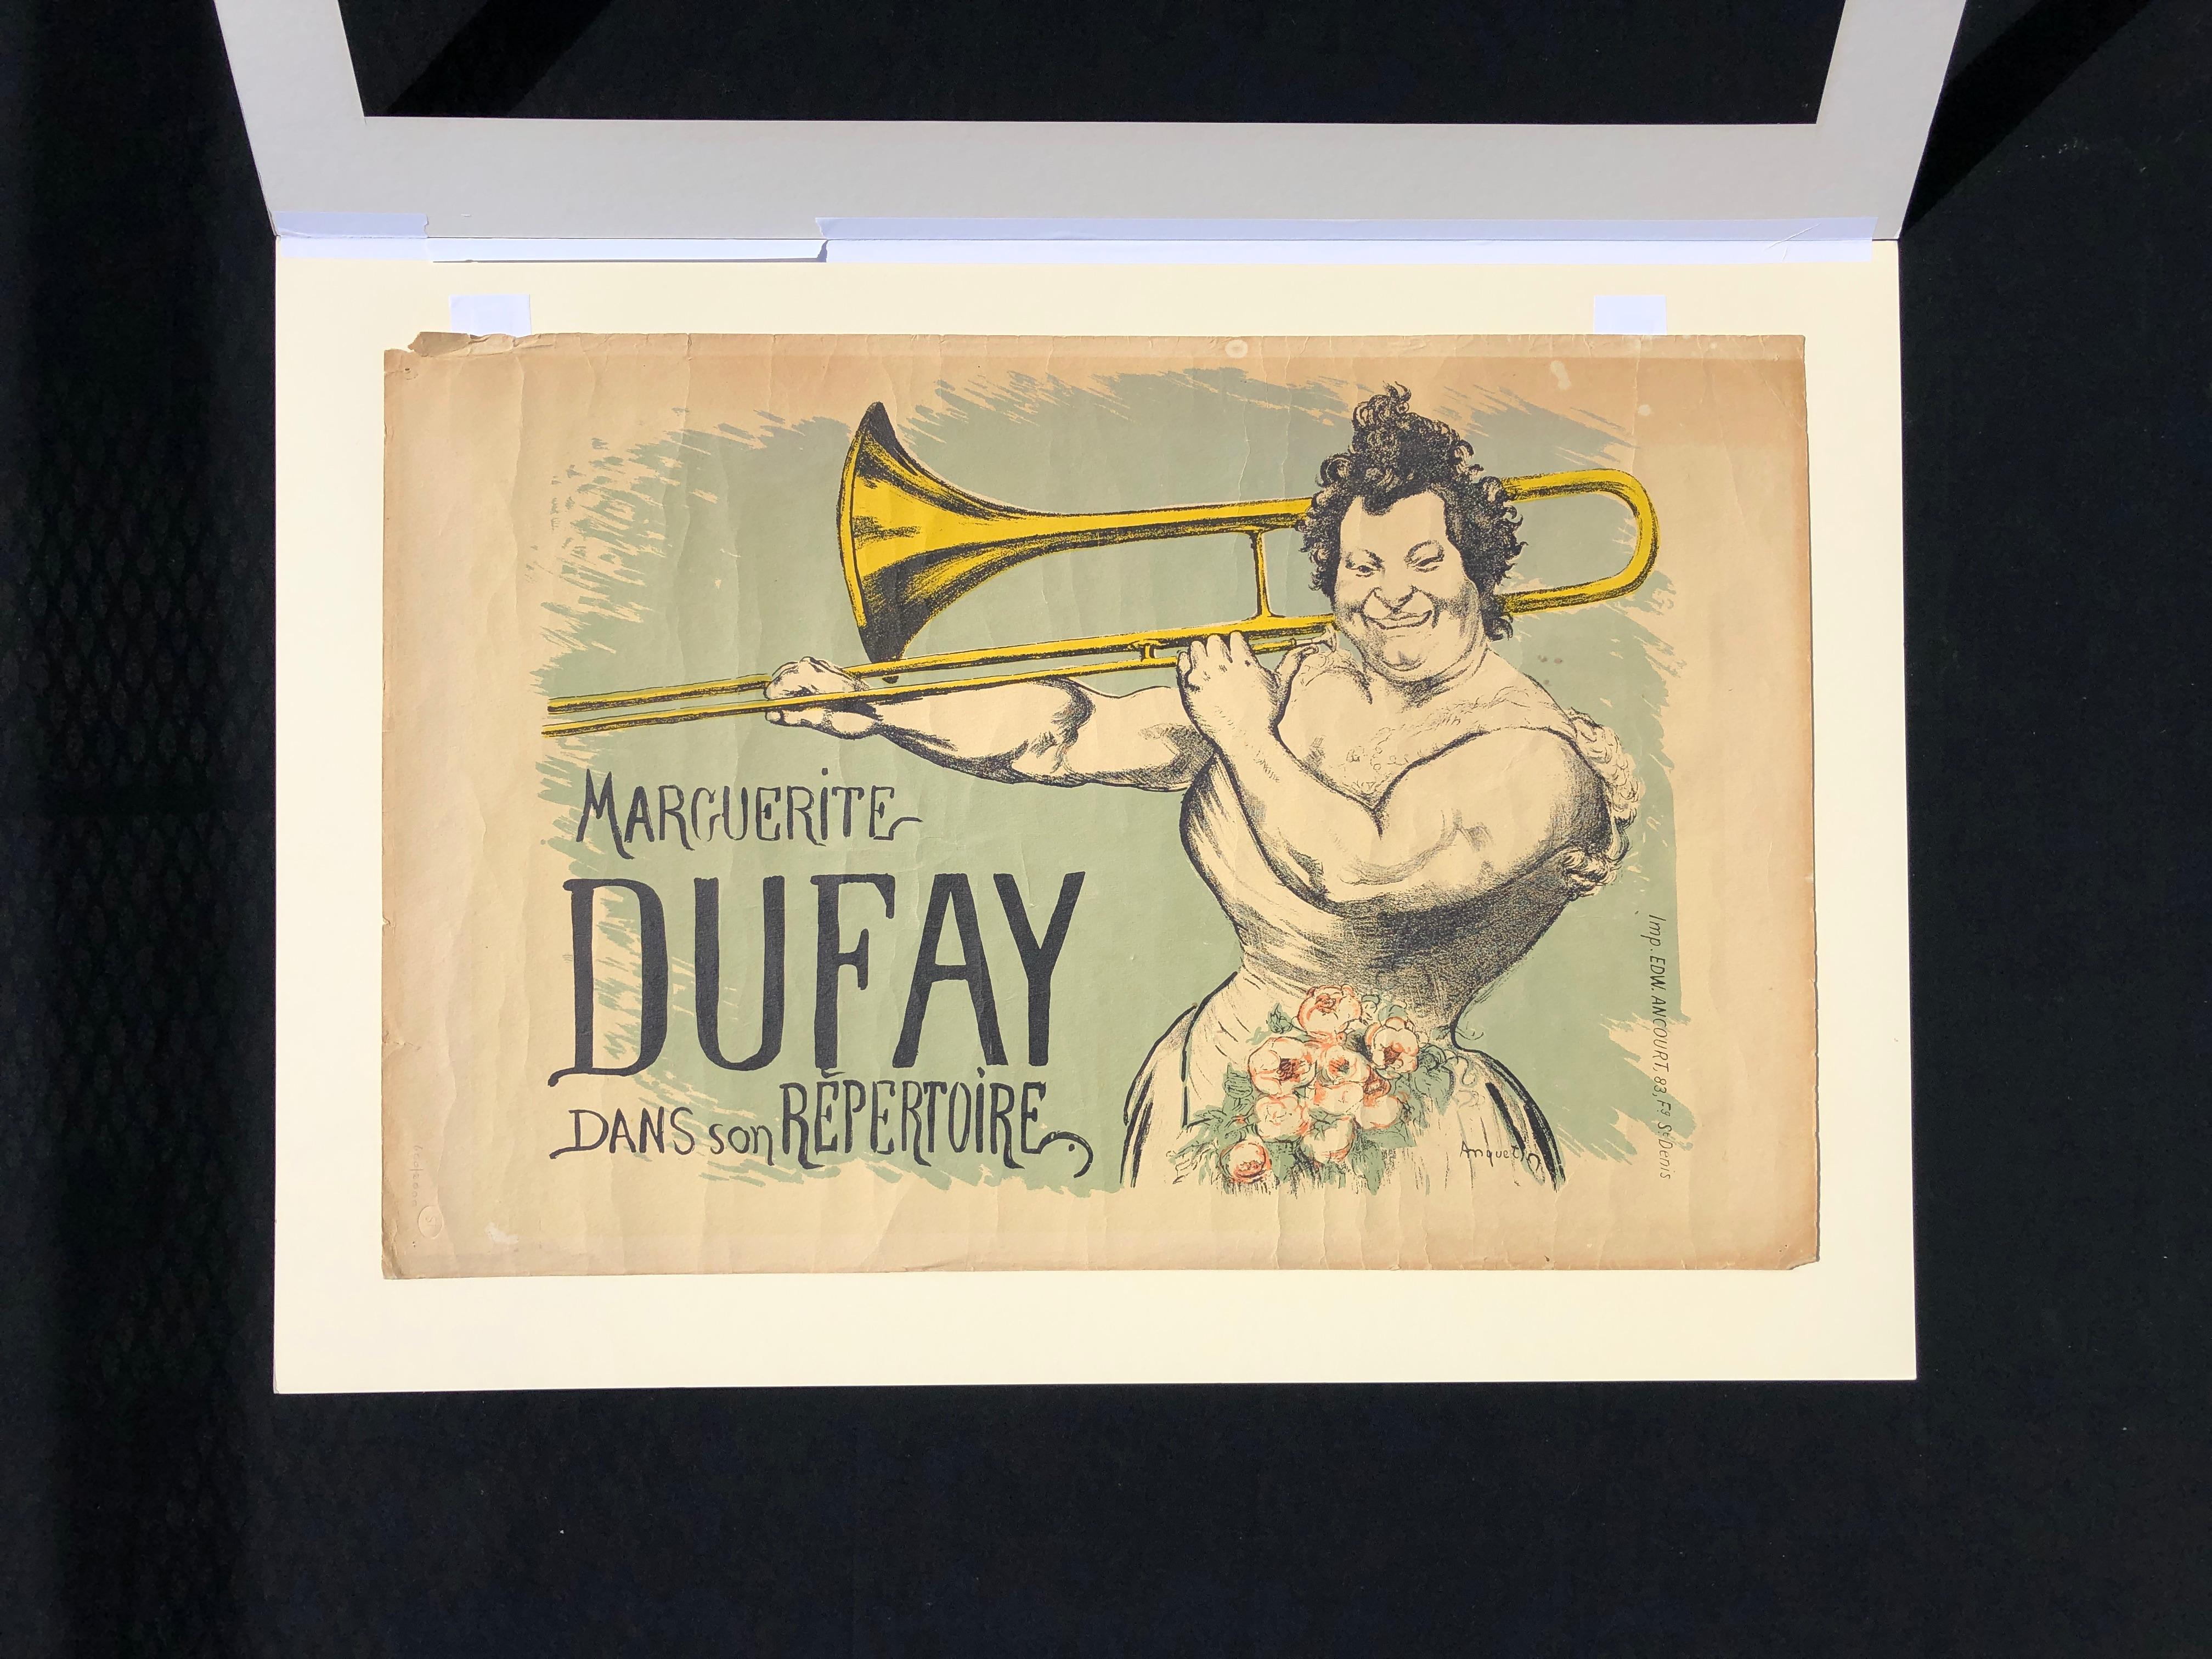 French Marguerite Dufay - Vintage lithographic Art Nouveau poster by Louis Anquetin For Sale